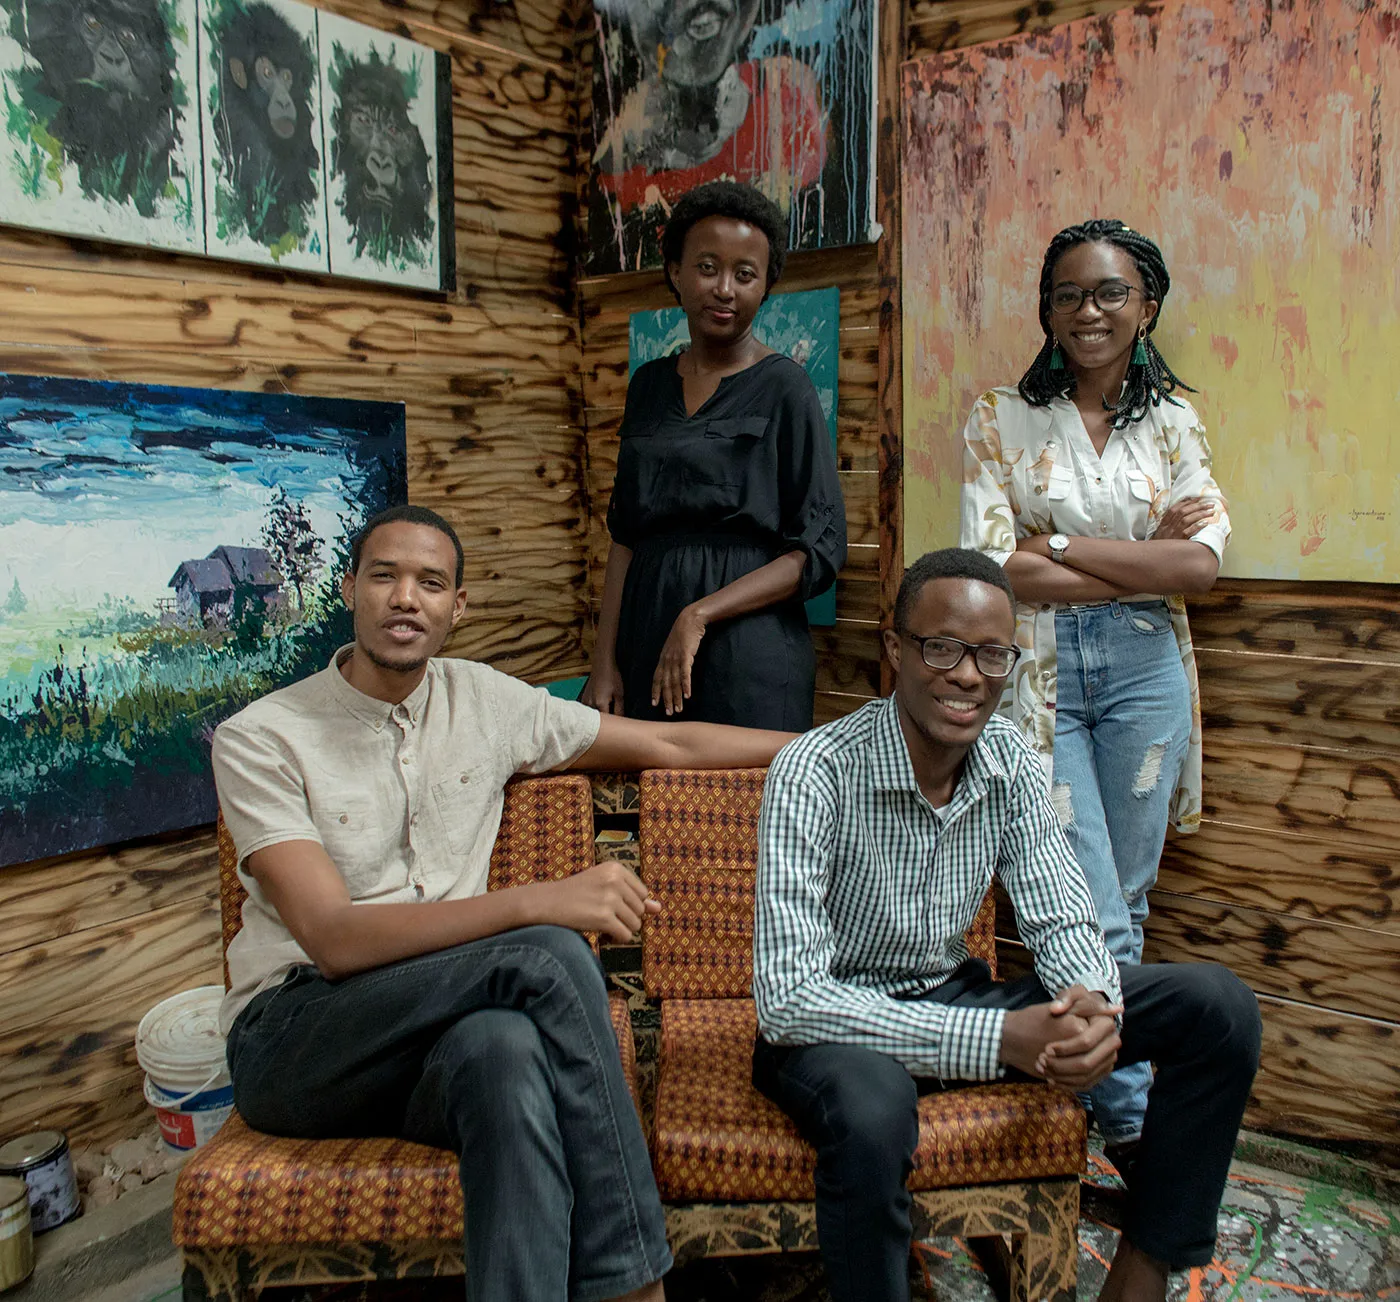 Dominique (top right) and part of her Imagine We Team (clockwise): Aaron Migaywa, Mico Jamal and Lina Ishimwe.